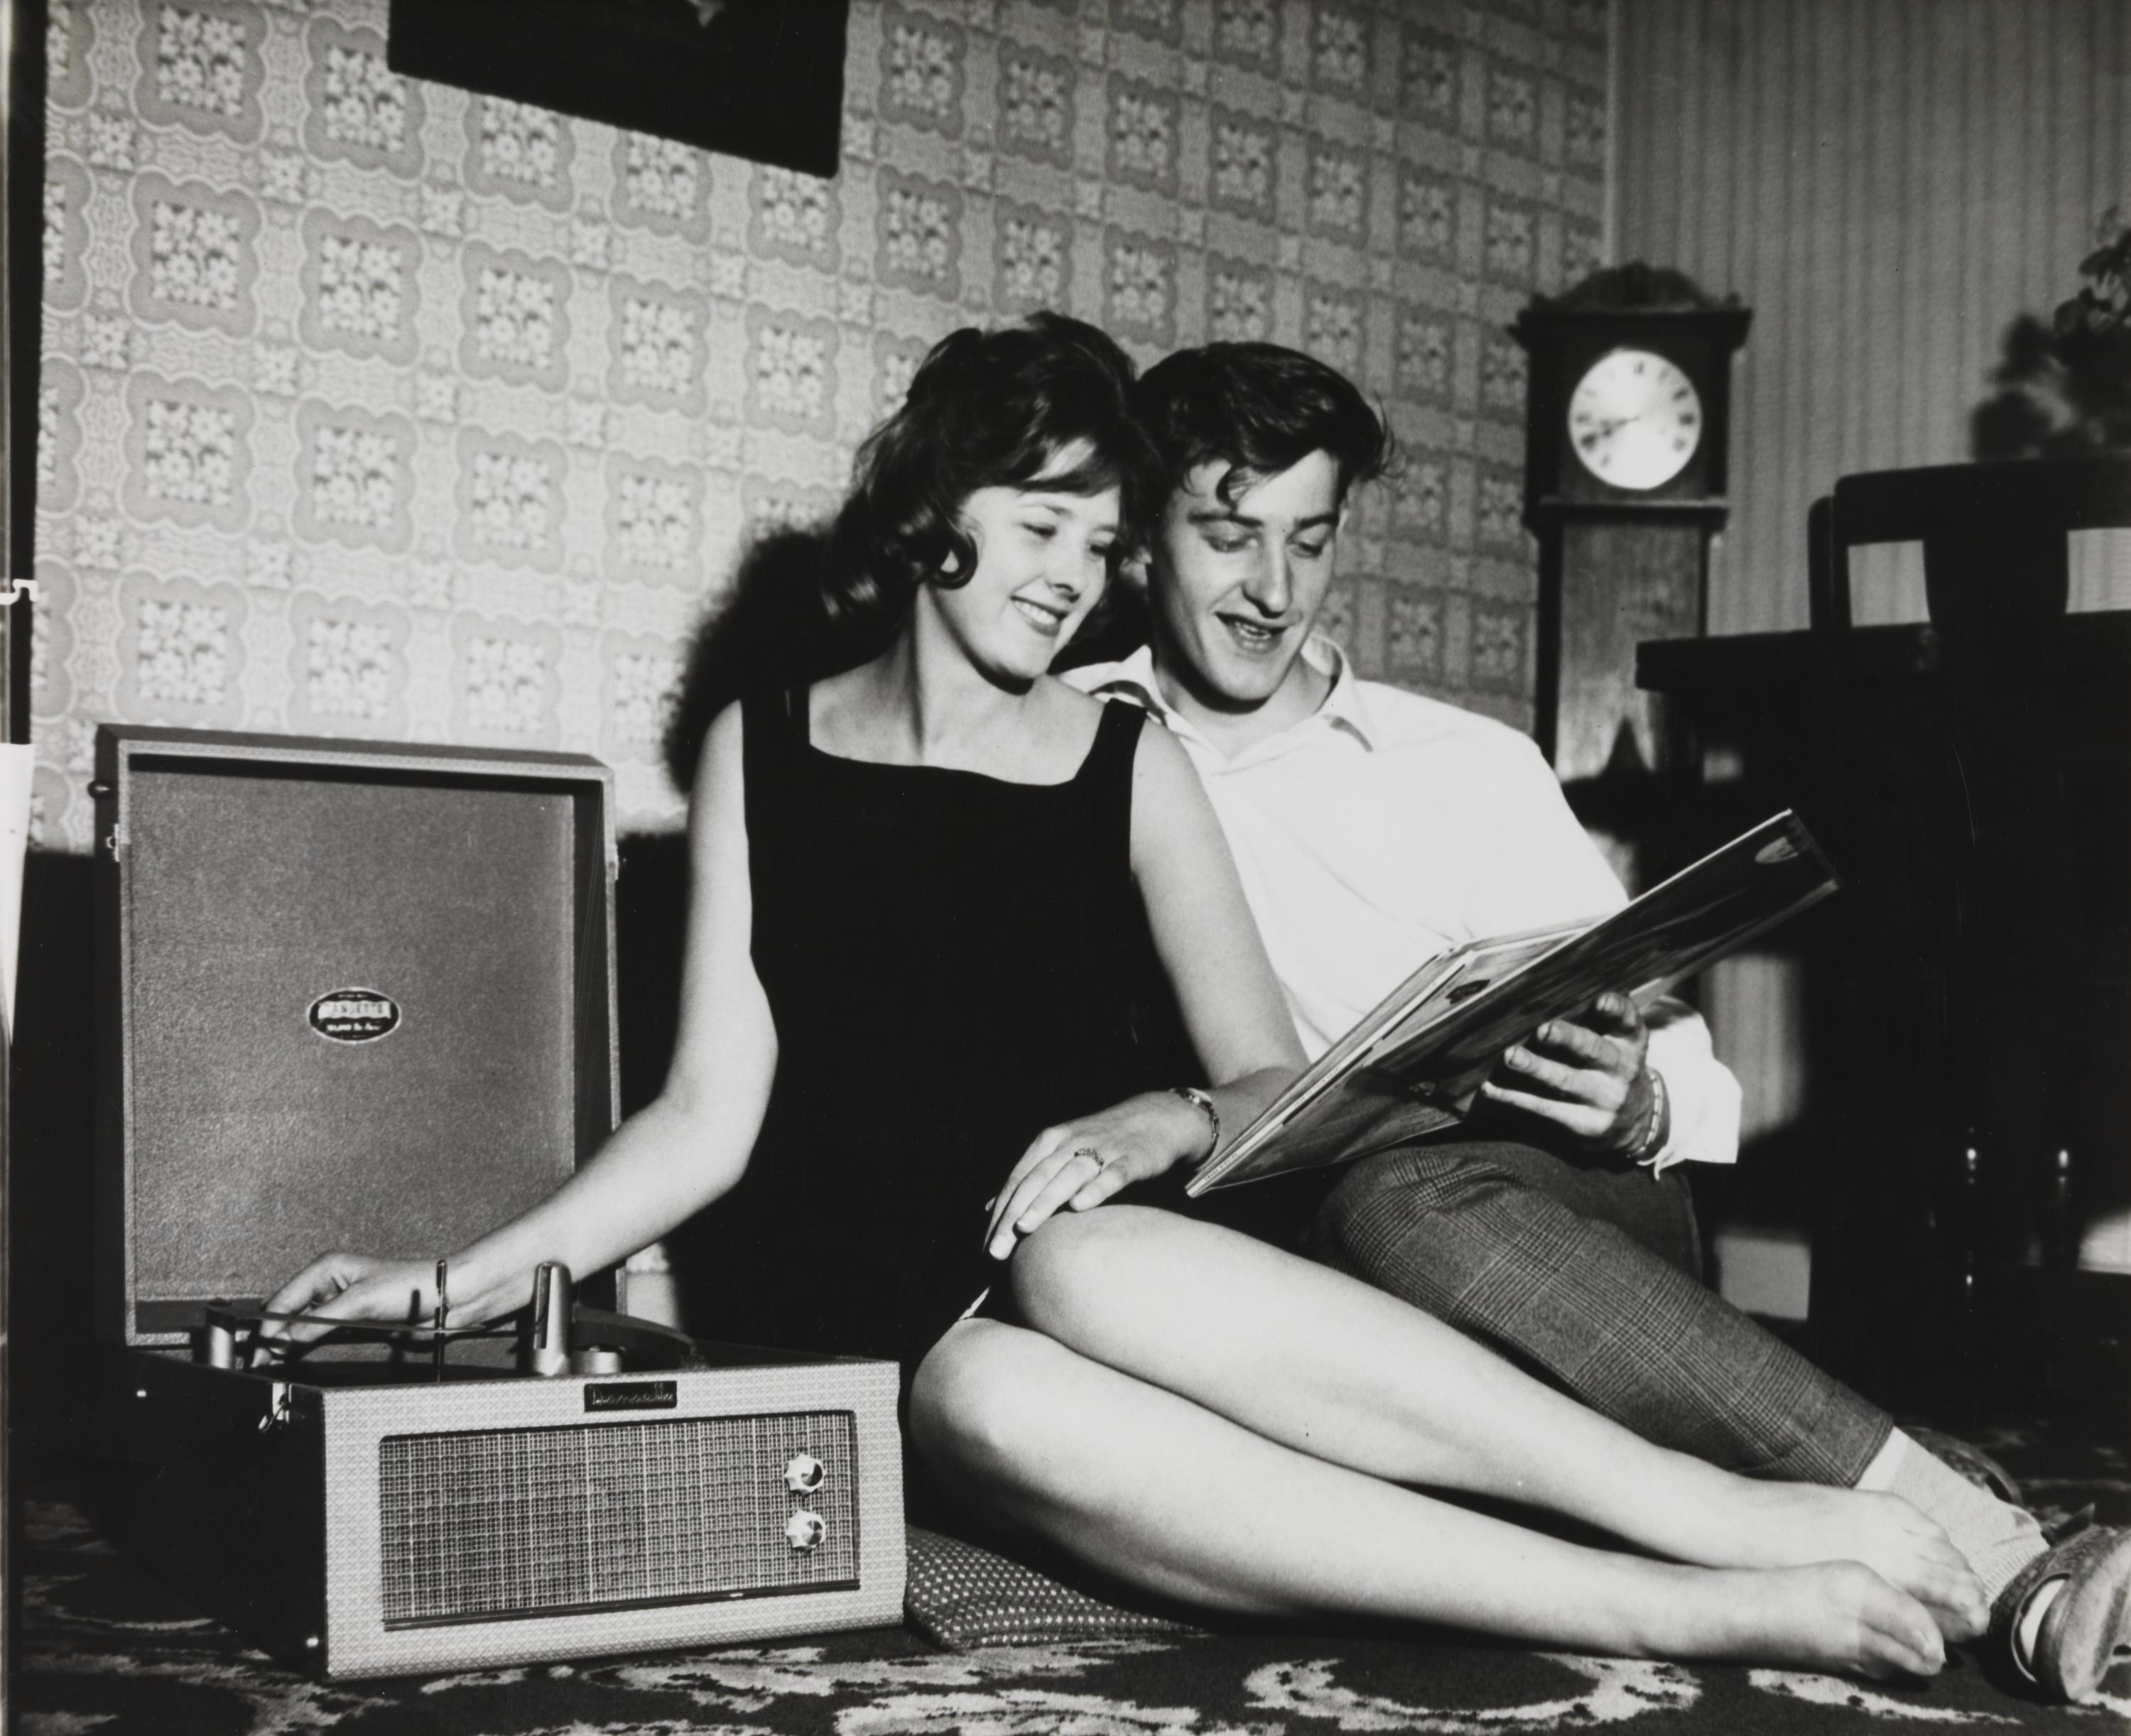 Young couple listening to music and looking at records in a living room